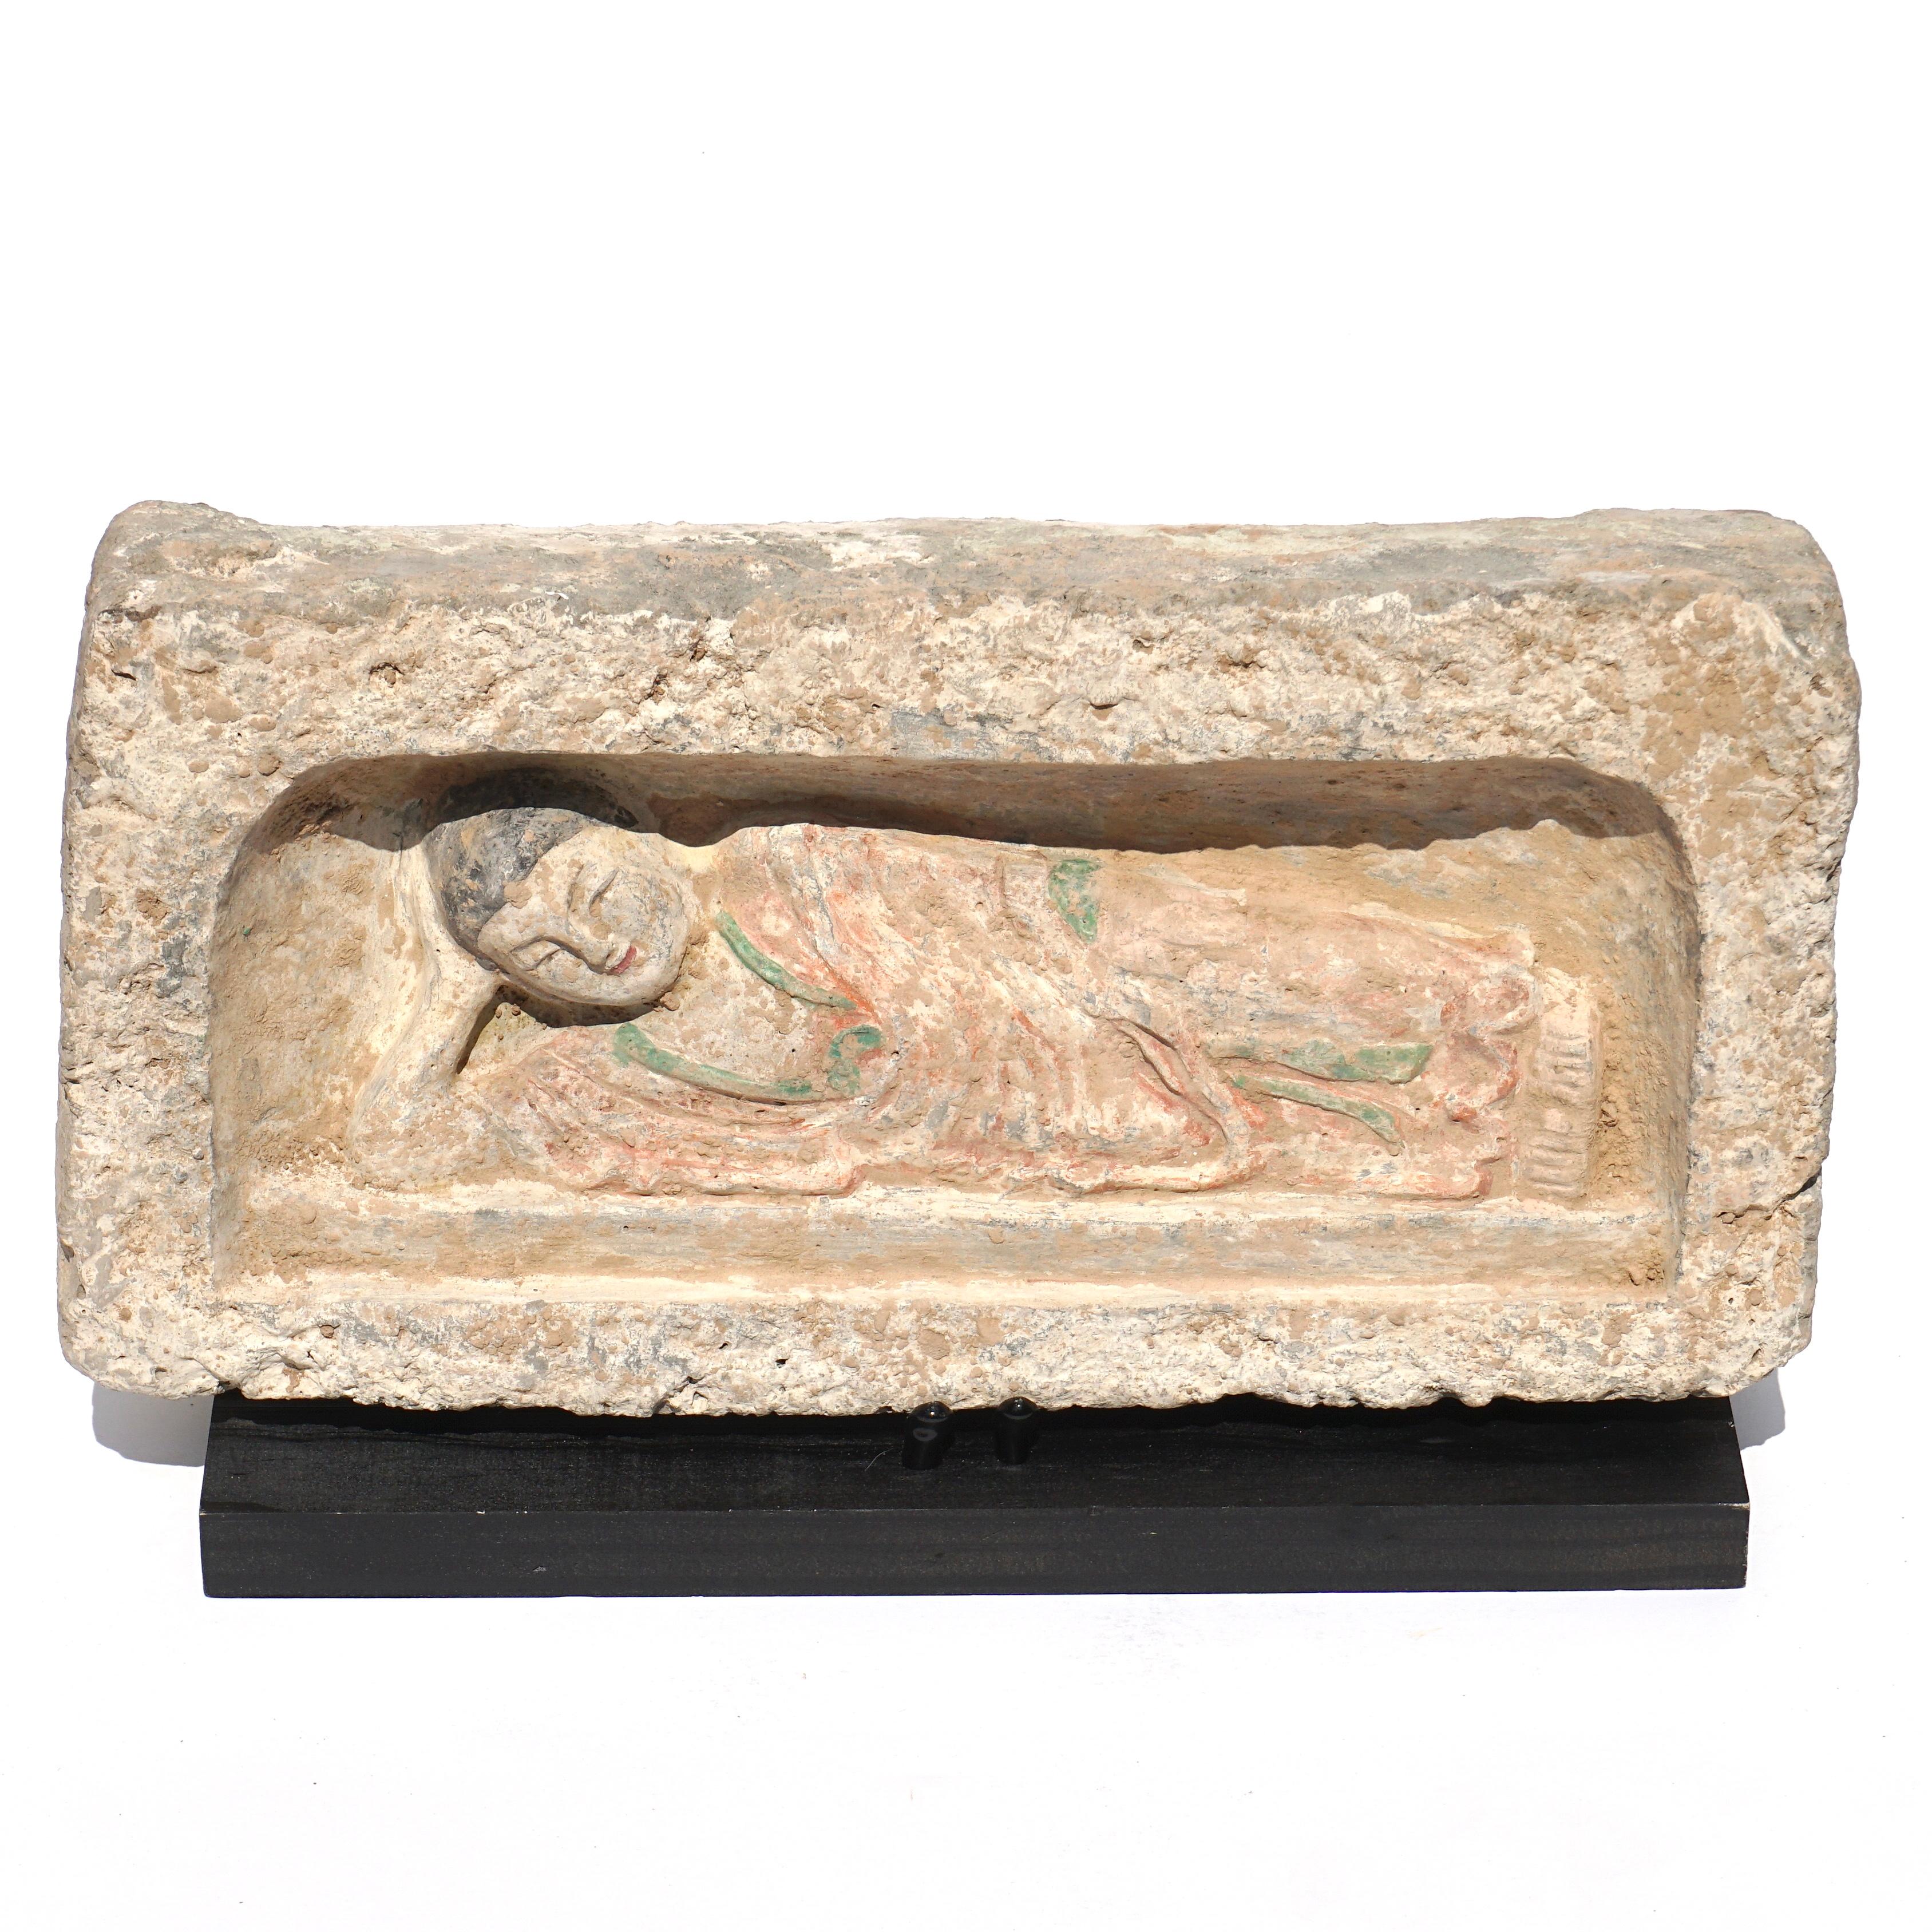 C. 386-534 AD. Northern Wei Dynasty. 

A interim Han-Tang Dynasty terrecotta painted brick featuring a reclining Buddha figure placed within a rectangular recess. Buddha, who supports his head with one arm, while the other is placed on his side,